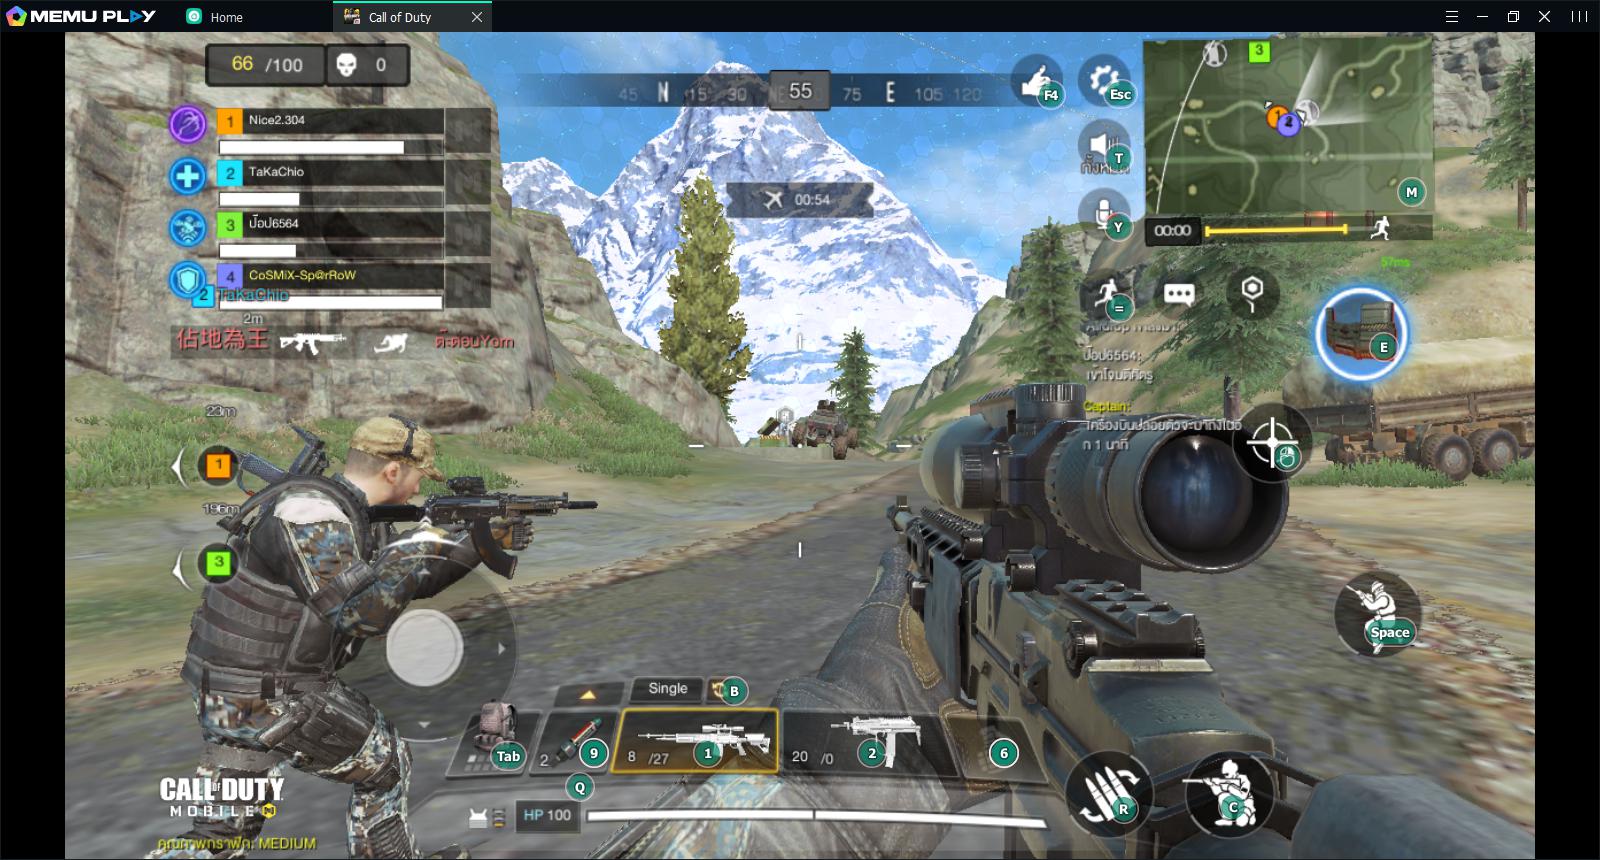 COD Mobile Epic soldier: Here's how to get them for free - MEmu Blog